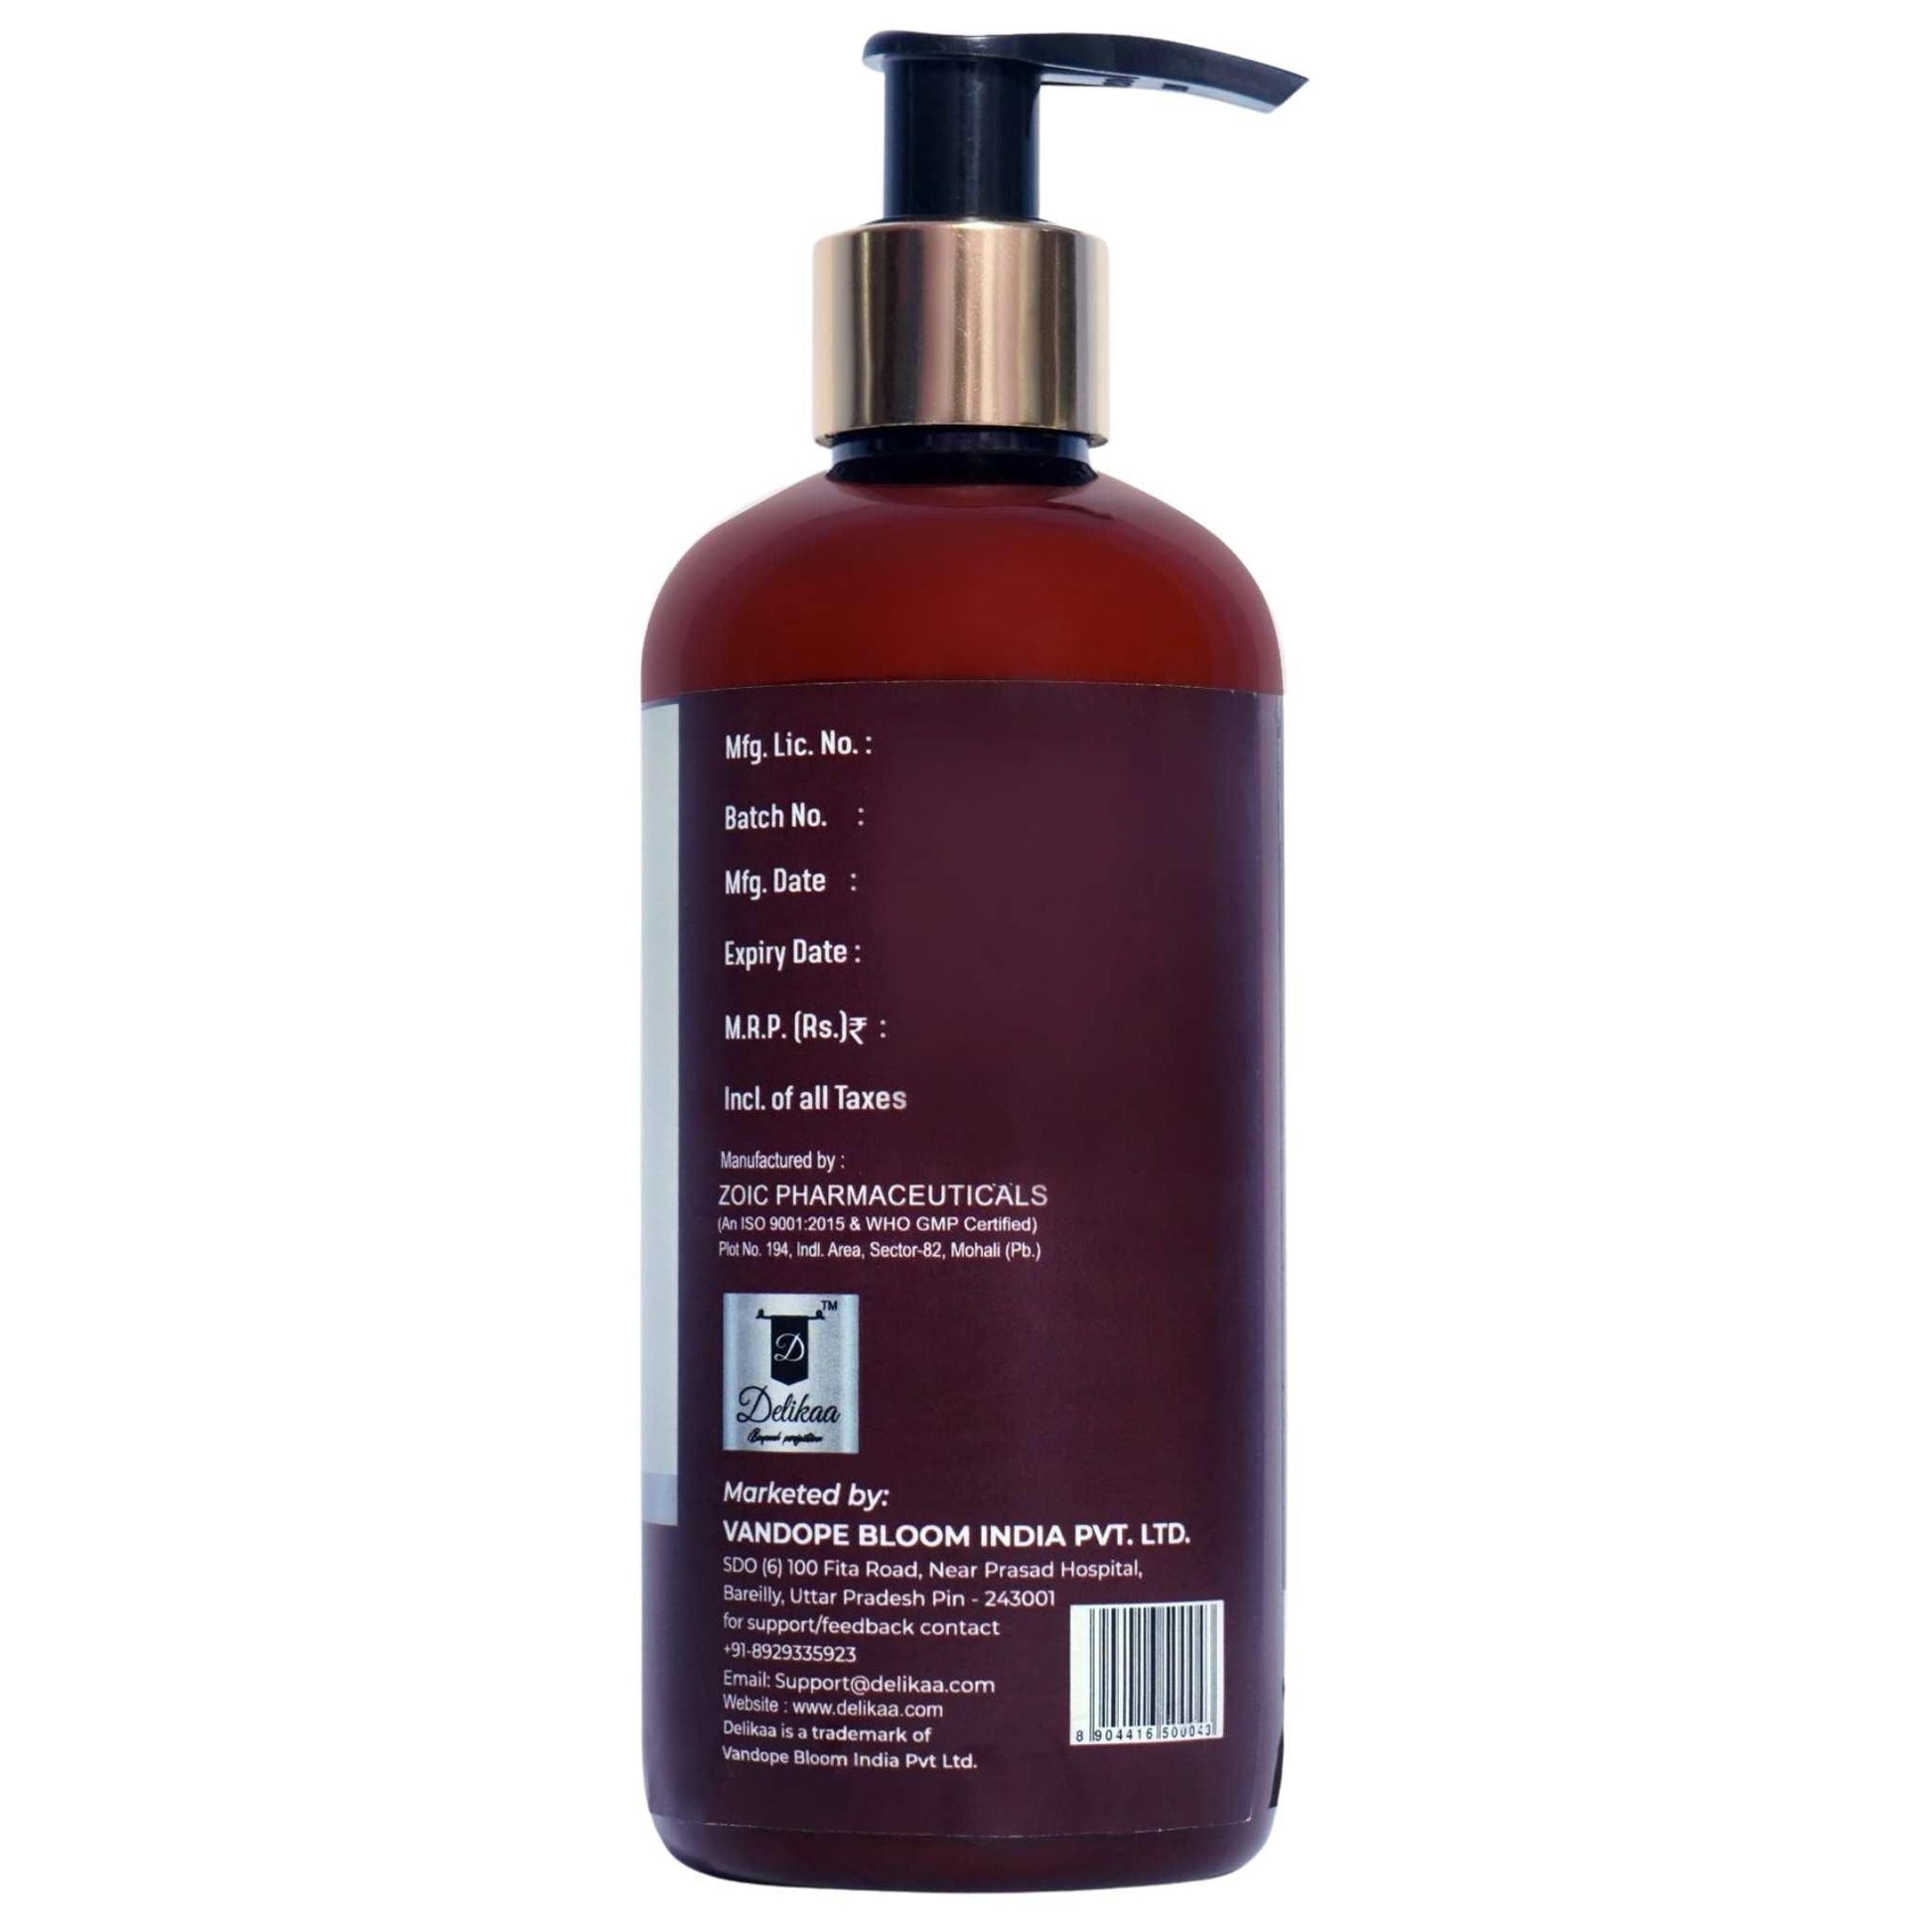 Delikaa Onion Hair Conditioner For Extra Strong, Shiny & Soft Hair. natural free from harmful chemicals & toxins. no parabens sulphate silicones or color. reduces hair fall makes hair strong silky shiny & soft. no side effects 